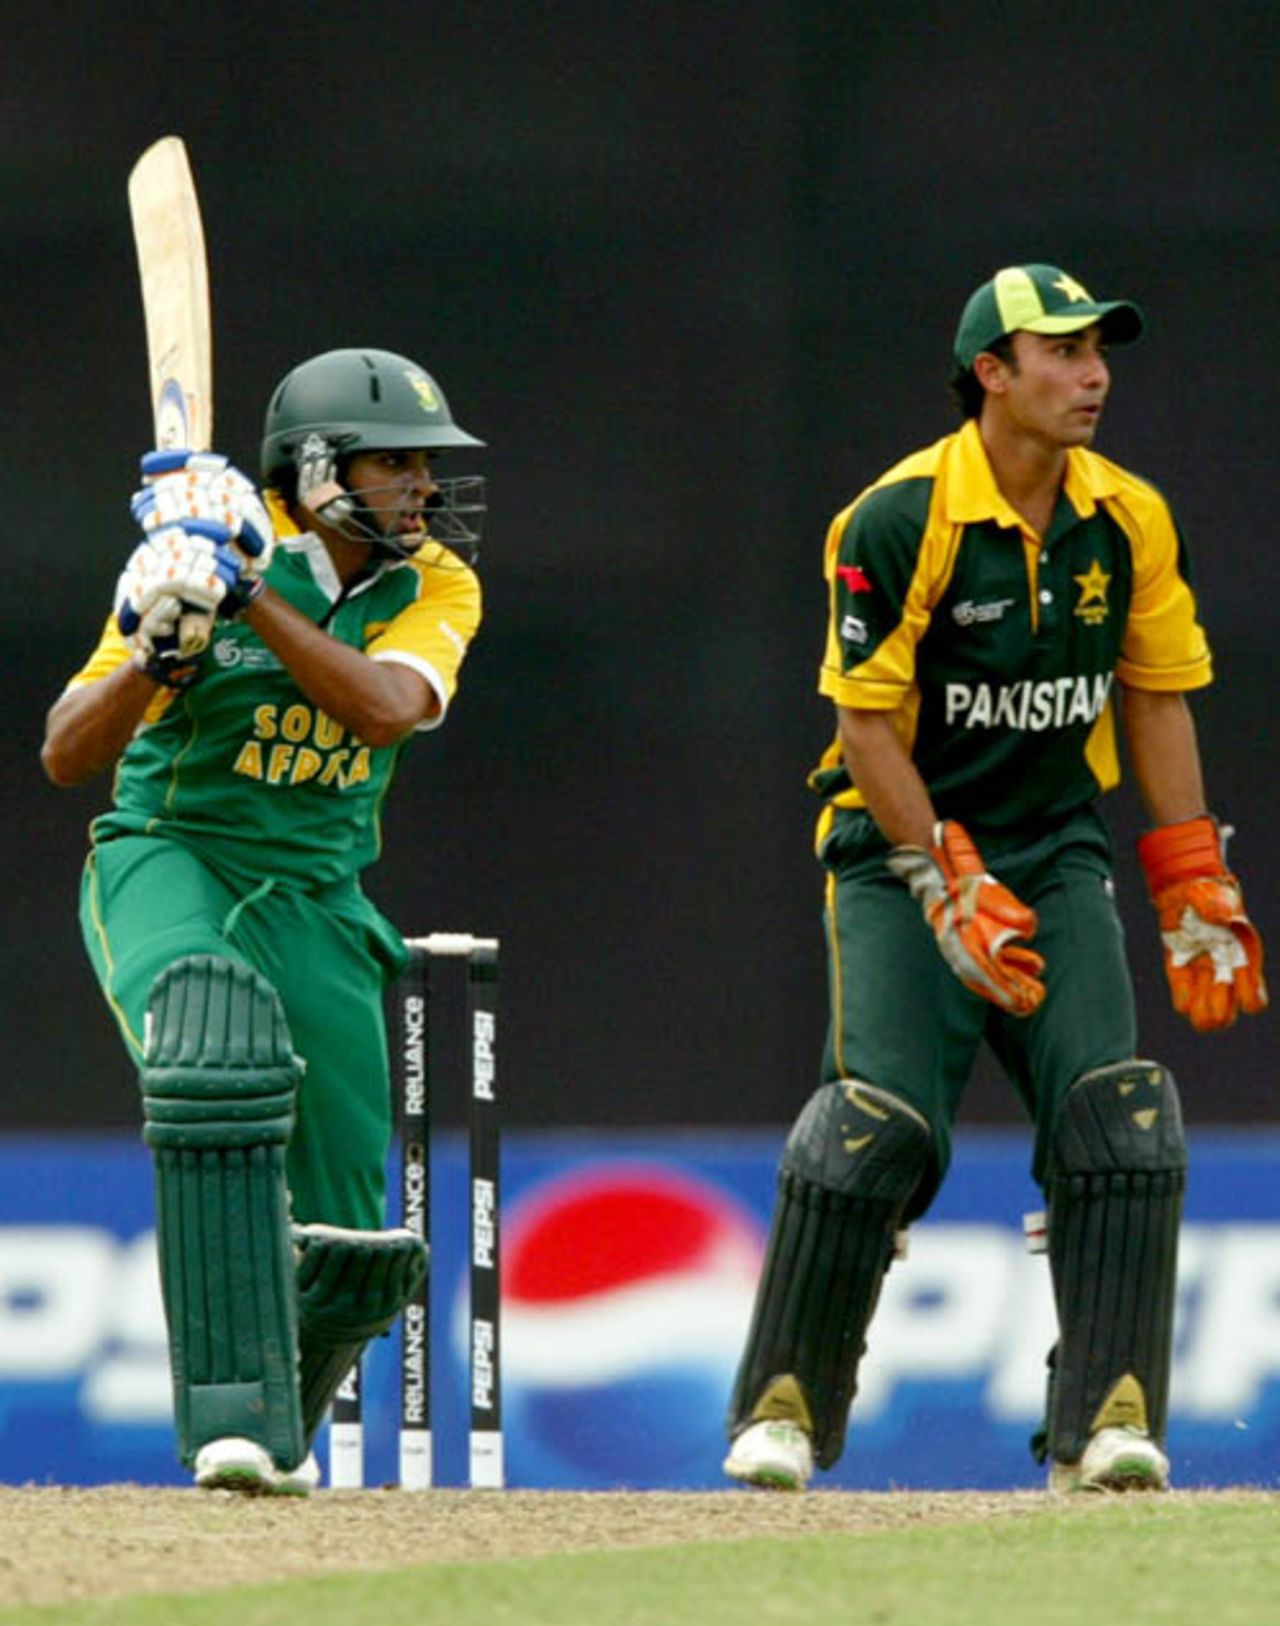 Jonathan Vandiar guides one through the off side as Ali Asad looks on, Pakistan v South Africa, 2nd semi-final, Under-19 World Cup, Kuala Lumpur, February 29, 2008 